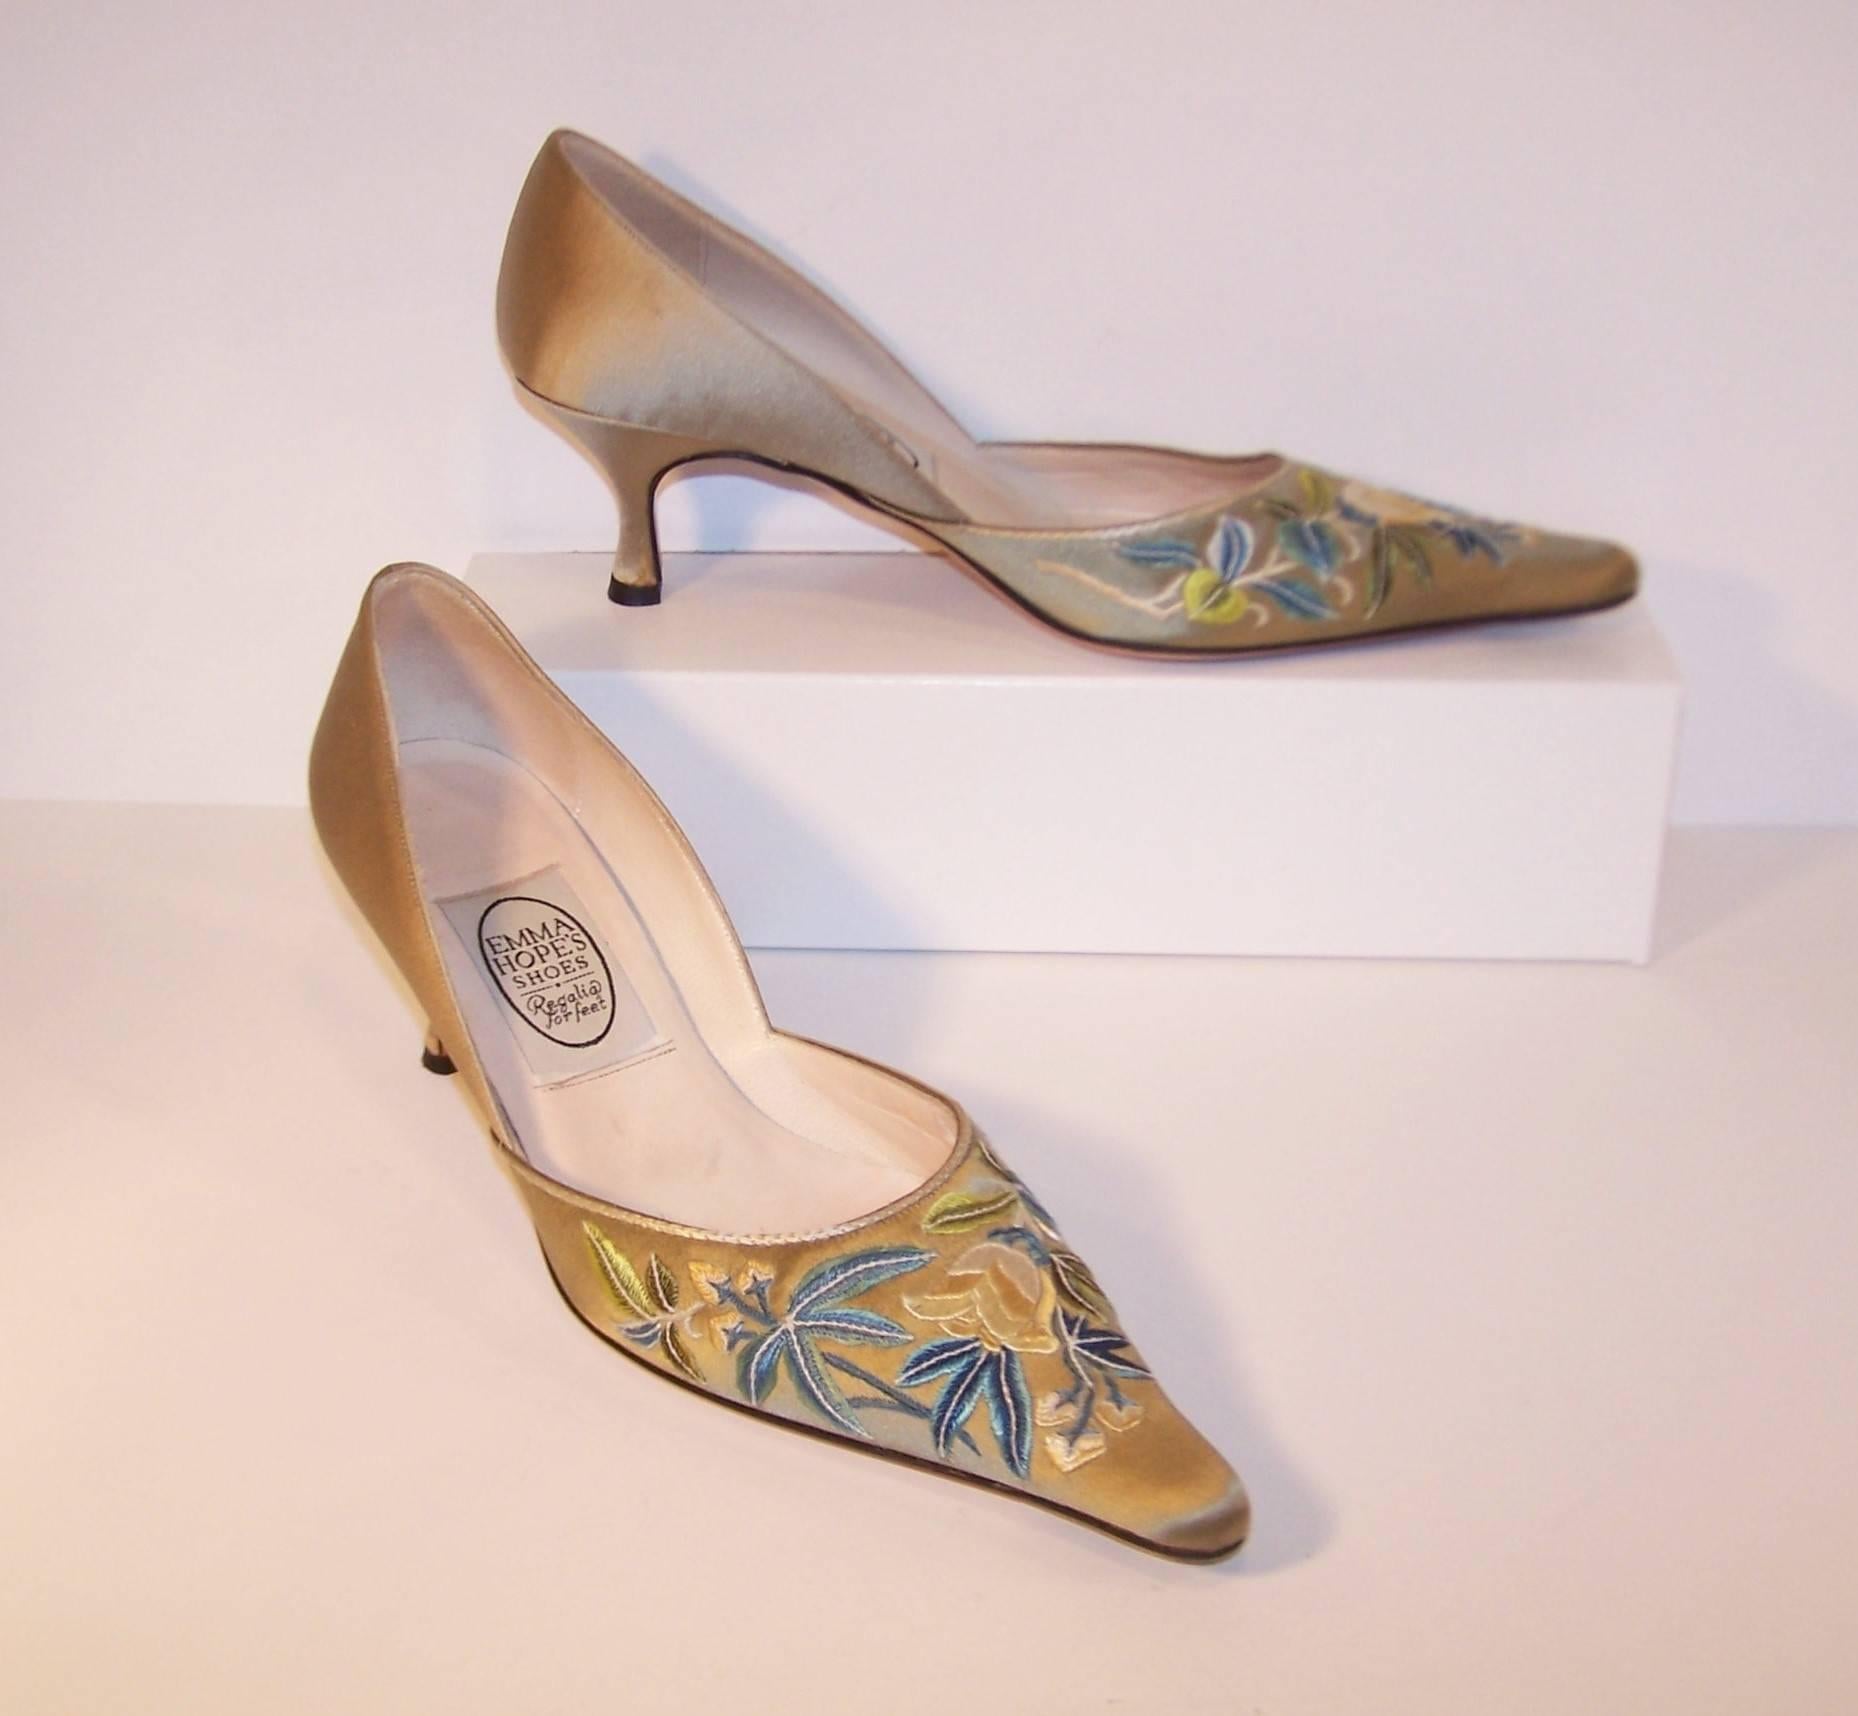 Emma Hope's tag line for her luxuriously hand crafted shoes is 'Regalia for the Feet' ... and that's the truth!  These lovely shoes are a pale sage green satin with floral embroidery in contrasting colors such as peacock blue, aqua, creme and